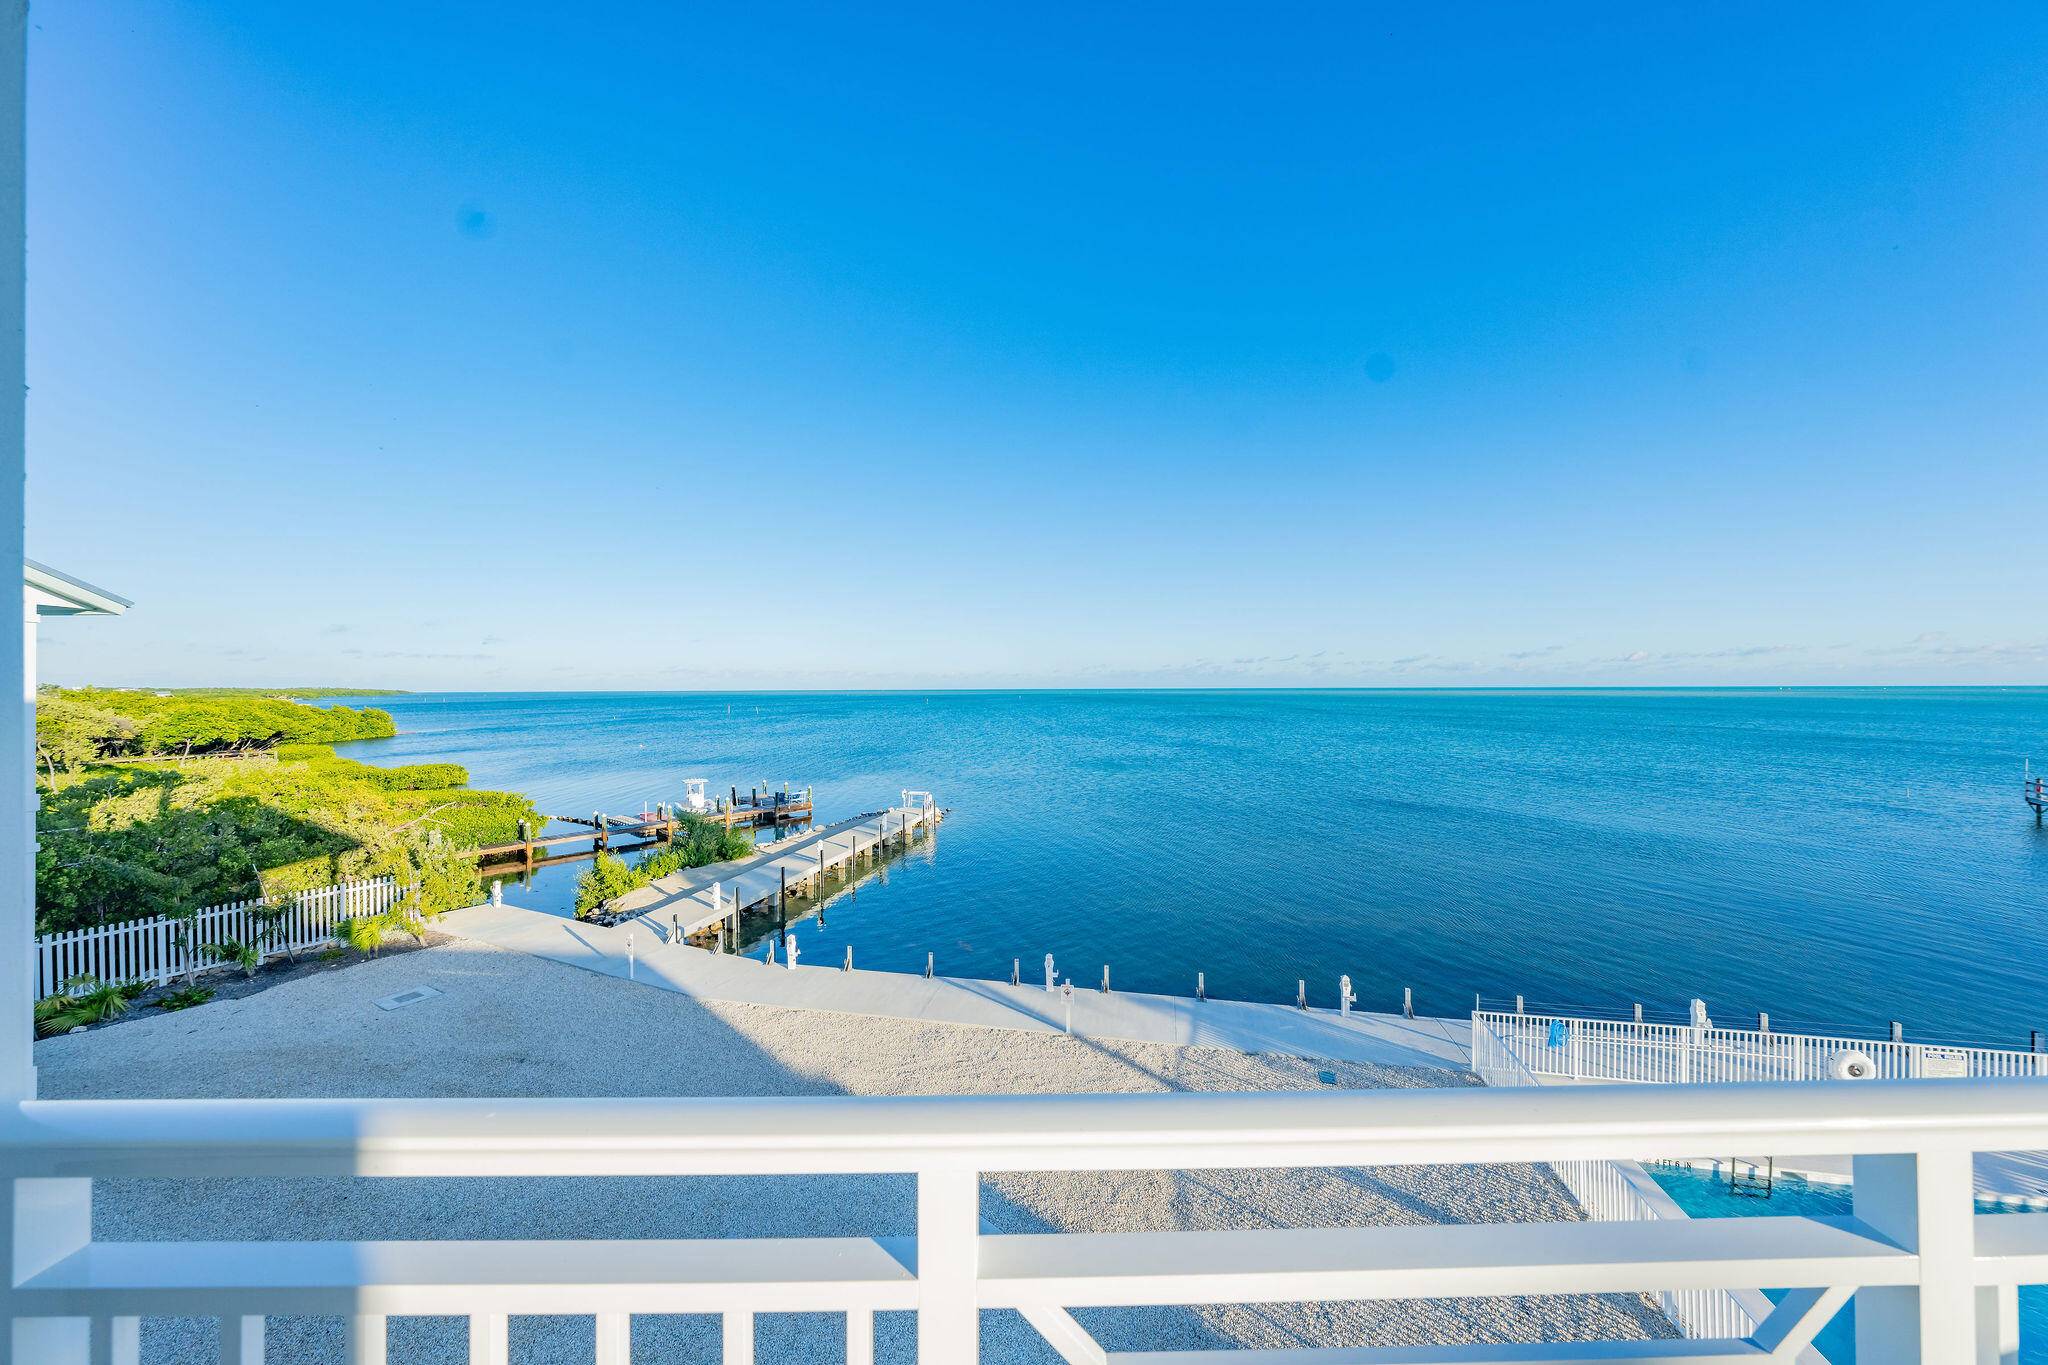 Peaceful Palms is a newly built luxury coastal development situated in the gated community of Islamorada, FL.